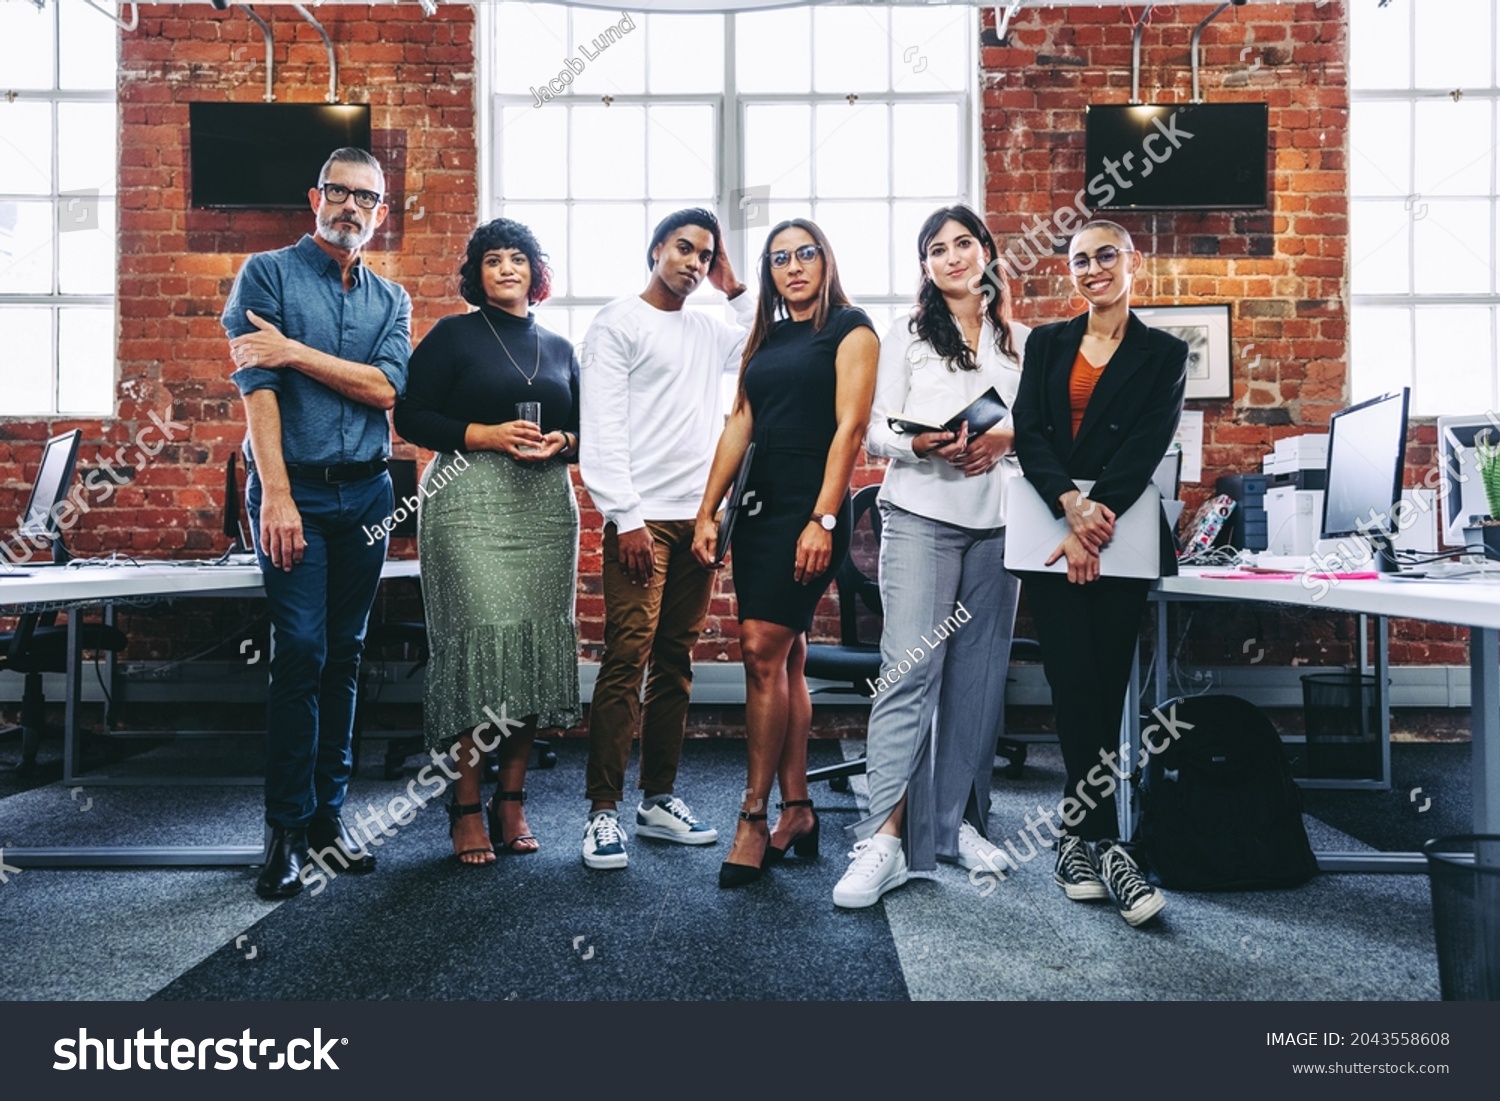 Diverse team of businesspeople standing together in an office. Group of modern businesspeople looking at the camera in a creative workplace. Business colleagues looking cheerful. #2043558608